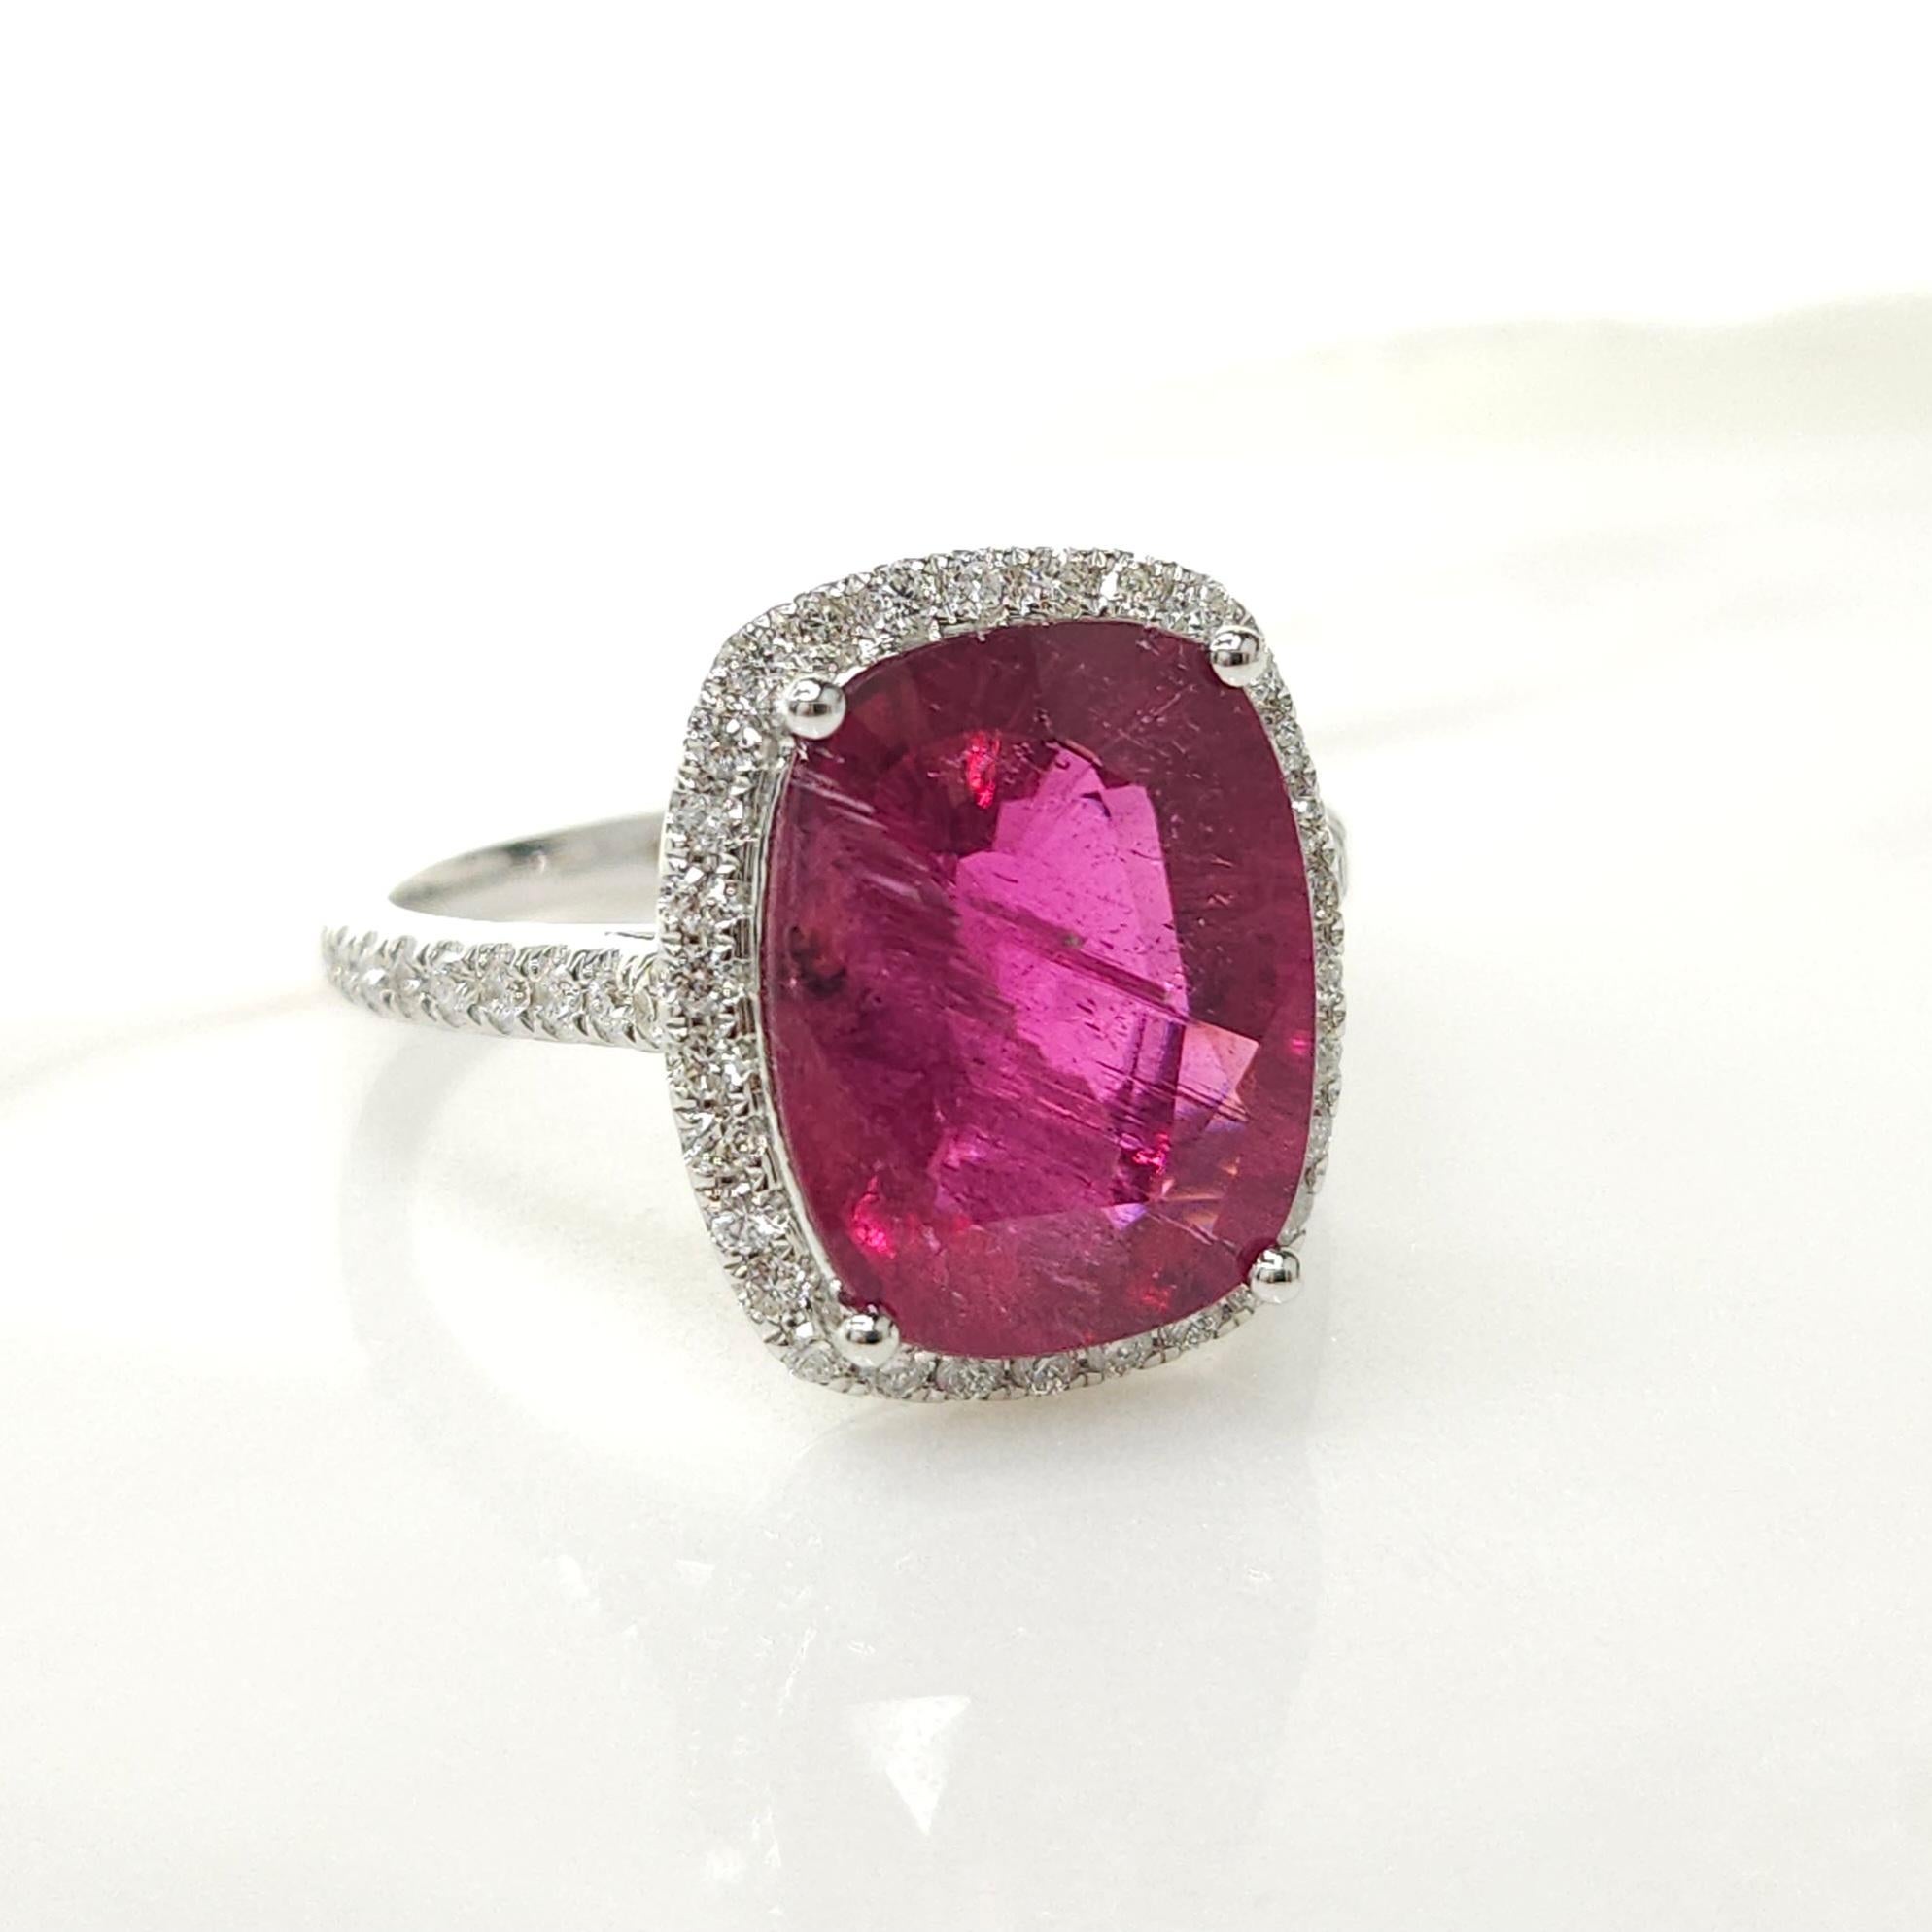 Introducing a breathtaking piece of jewelry featuring a dazzling IGI Certified  4.56 Carat Tourmaline in a striking intense purplish pink color. The cushion-shaped tourmaline takes center stage in this modern style ring crafted from 18K White Gold